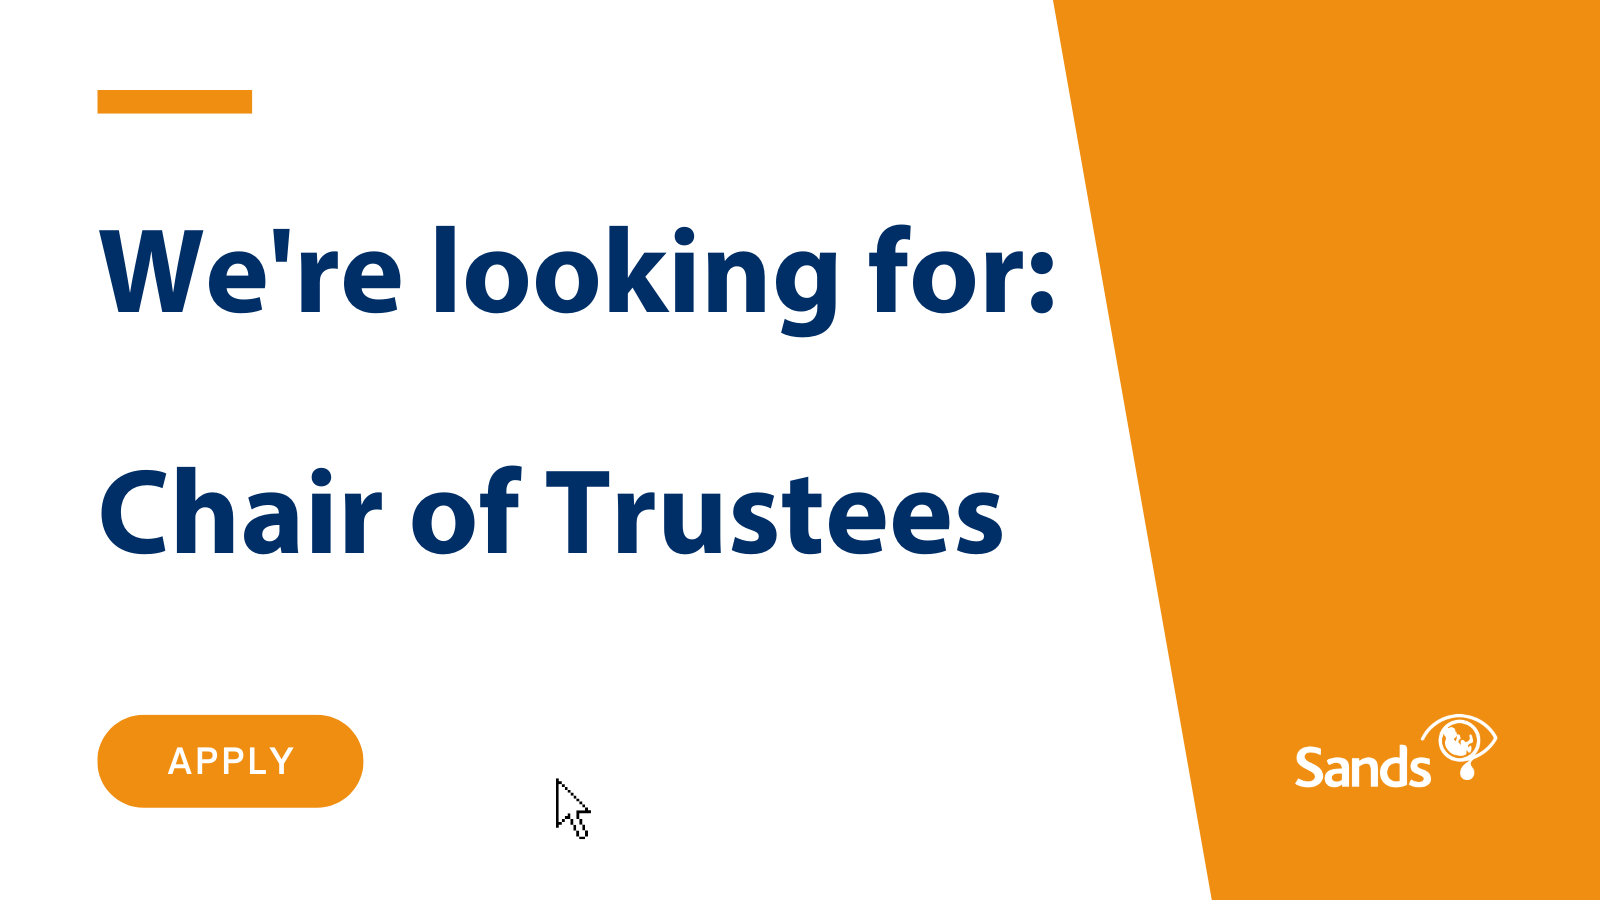 We are hiring Chair of Trustees